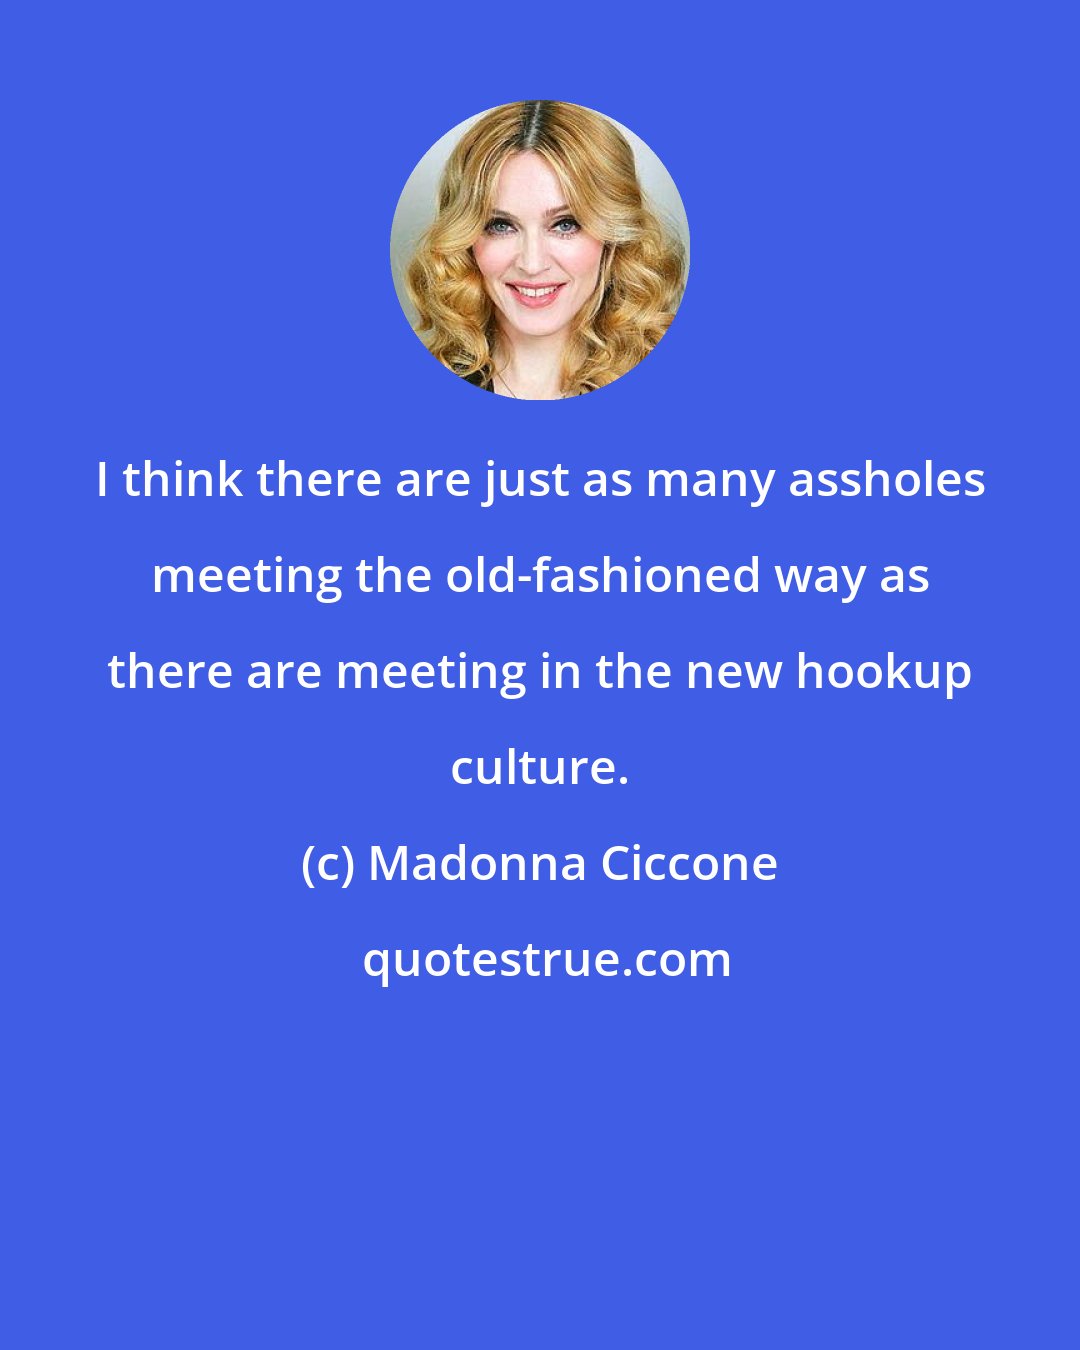 Madonna Ciccone: I think there are just as many assholes meeting the old-fashioned way as there are meeting in the new hookup culture.